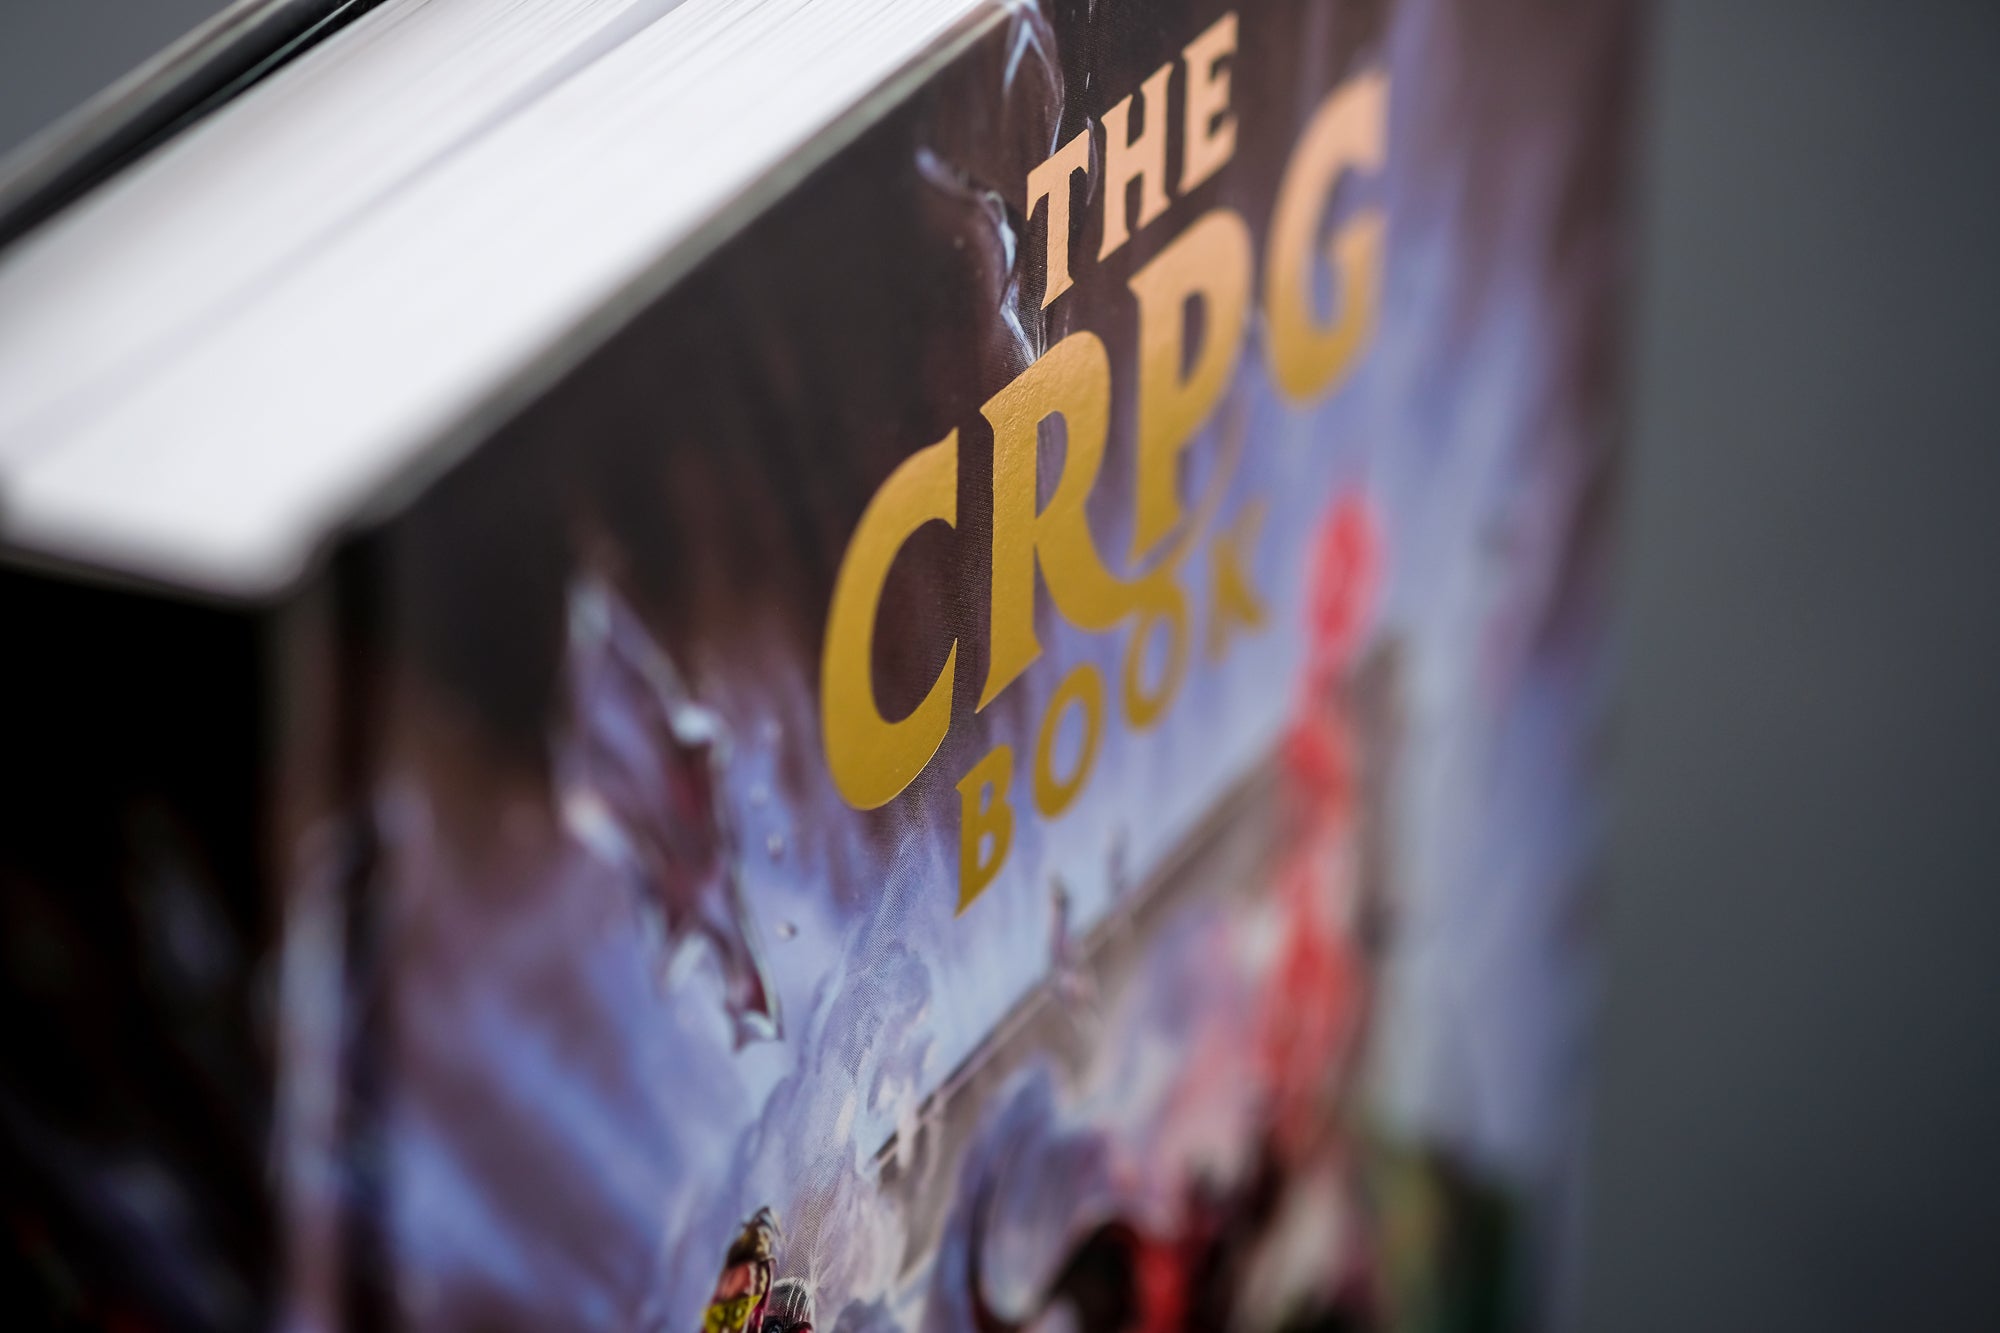 The CRPG Book: A Guide to Computer Role-Playing Games (Expanded Edition)